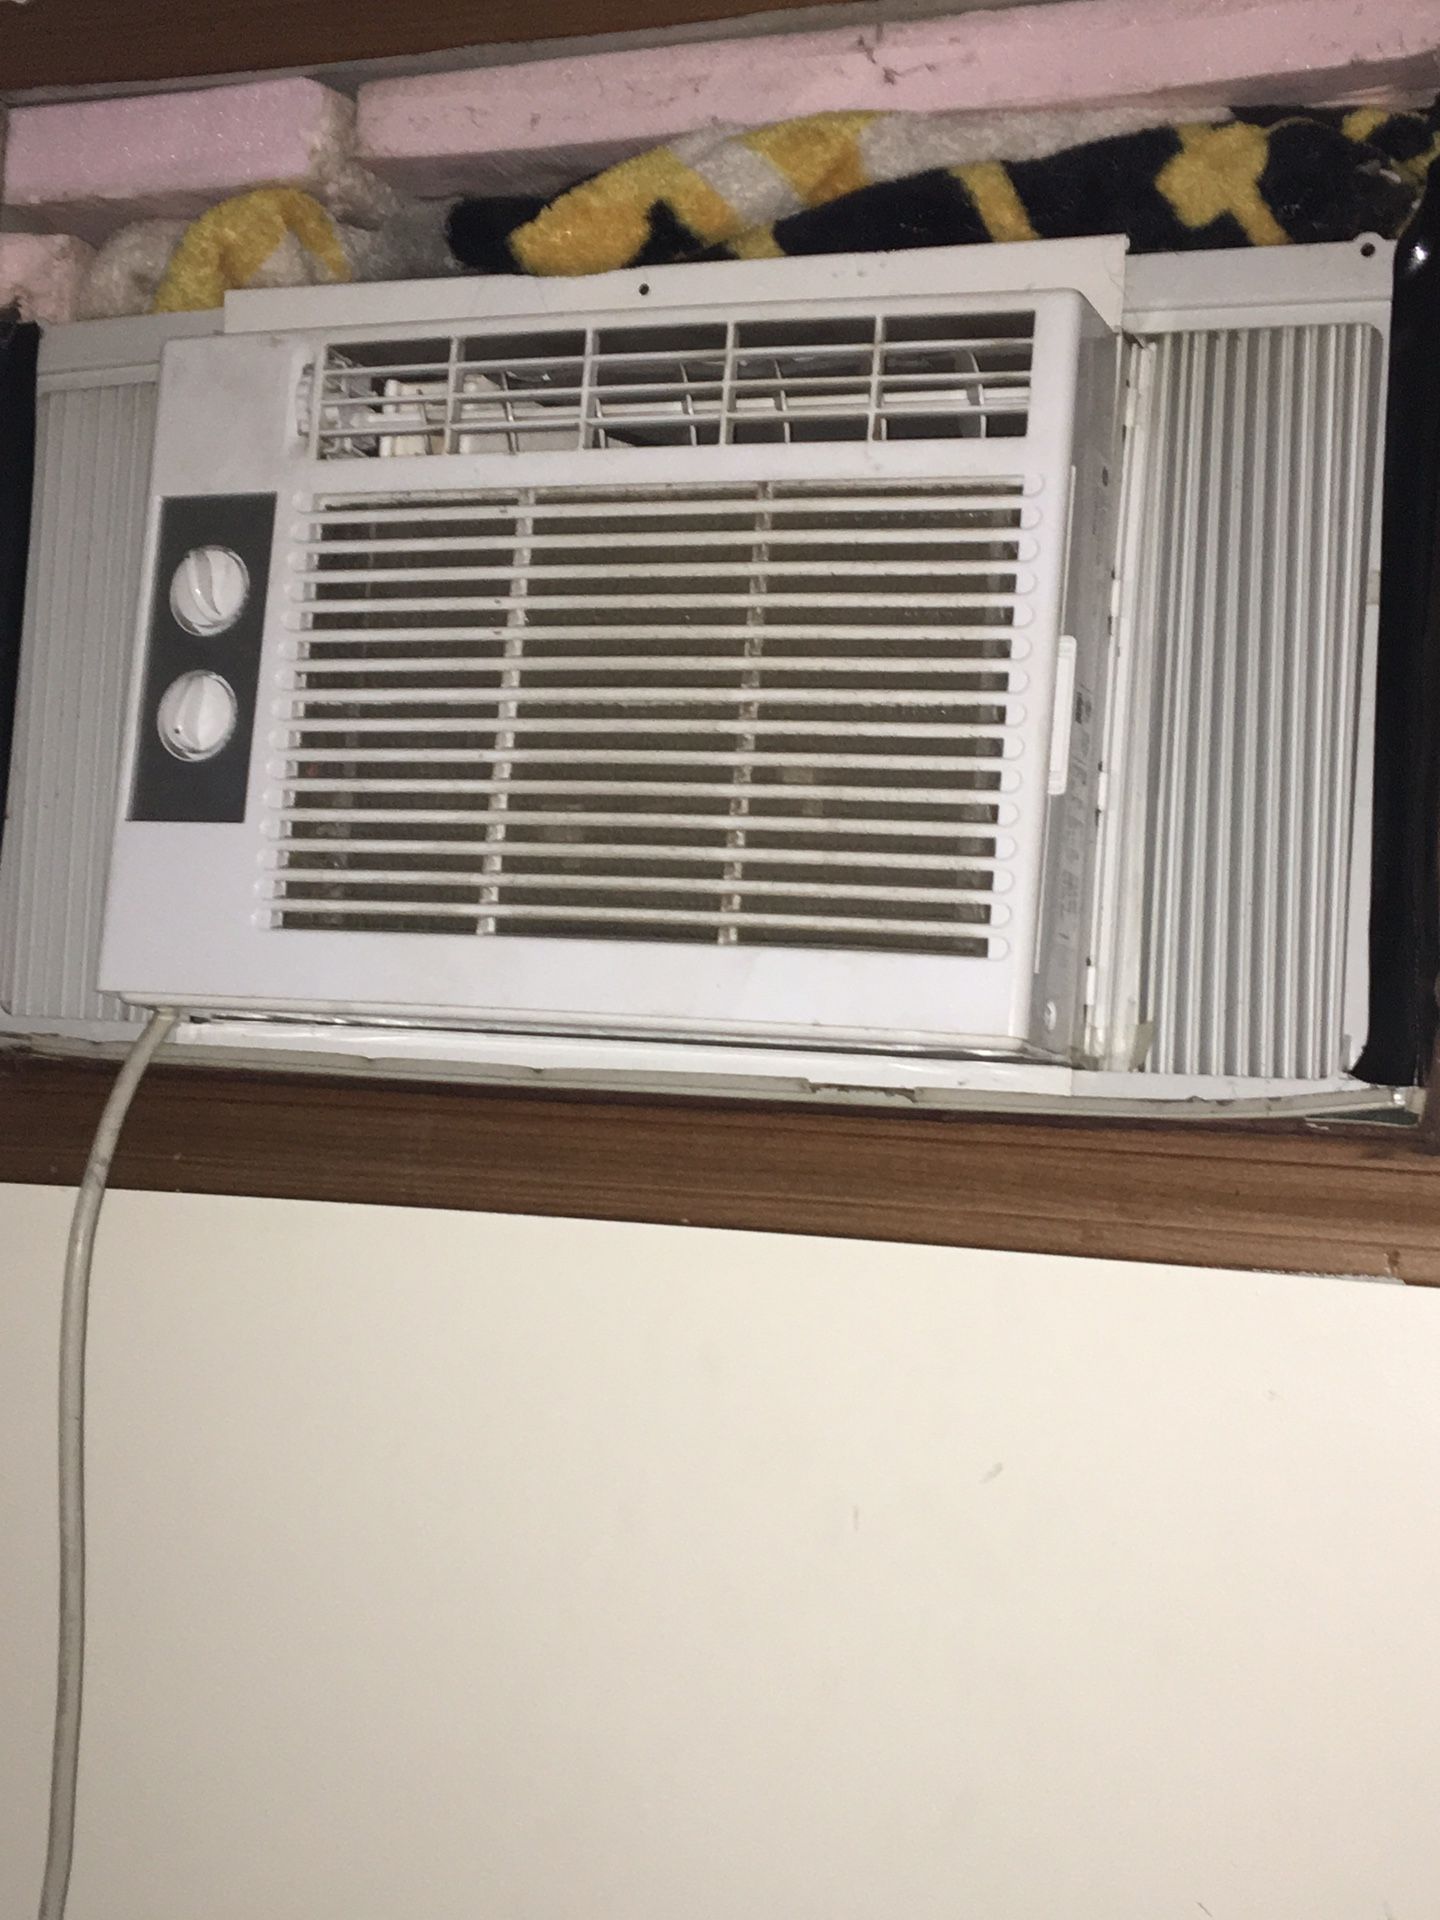 Air conditioner works great!!